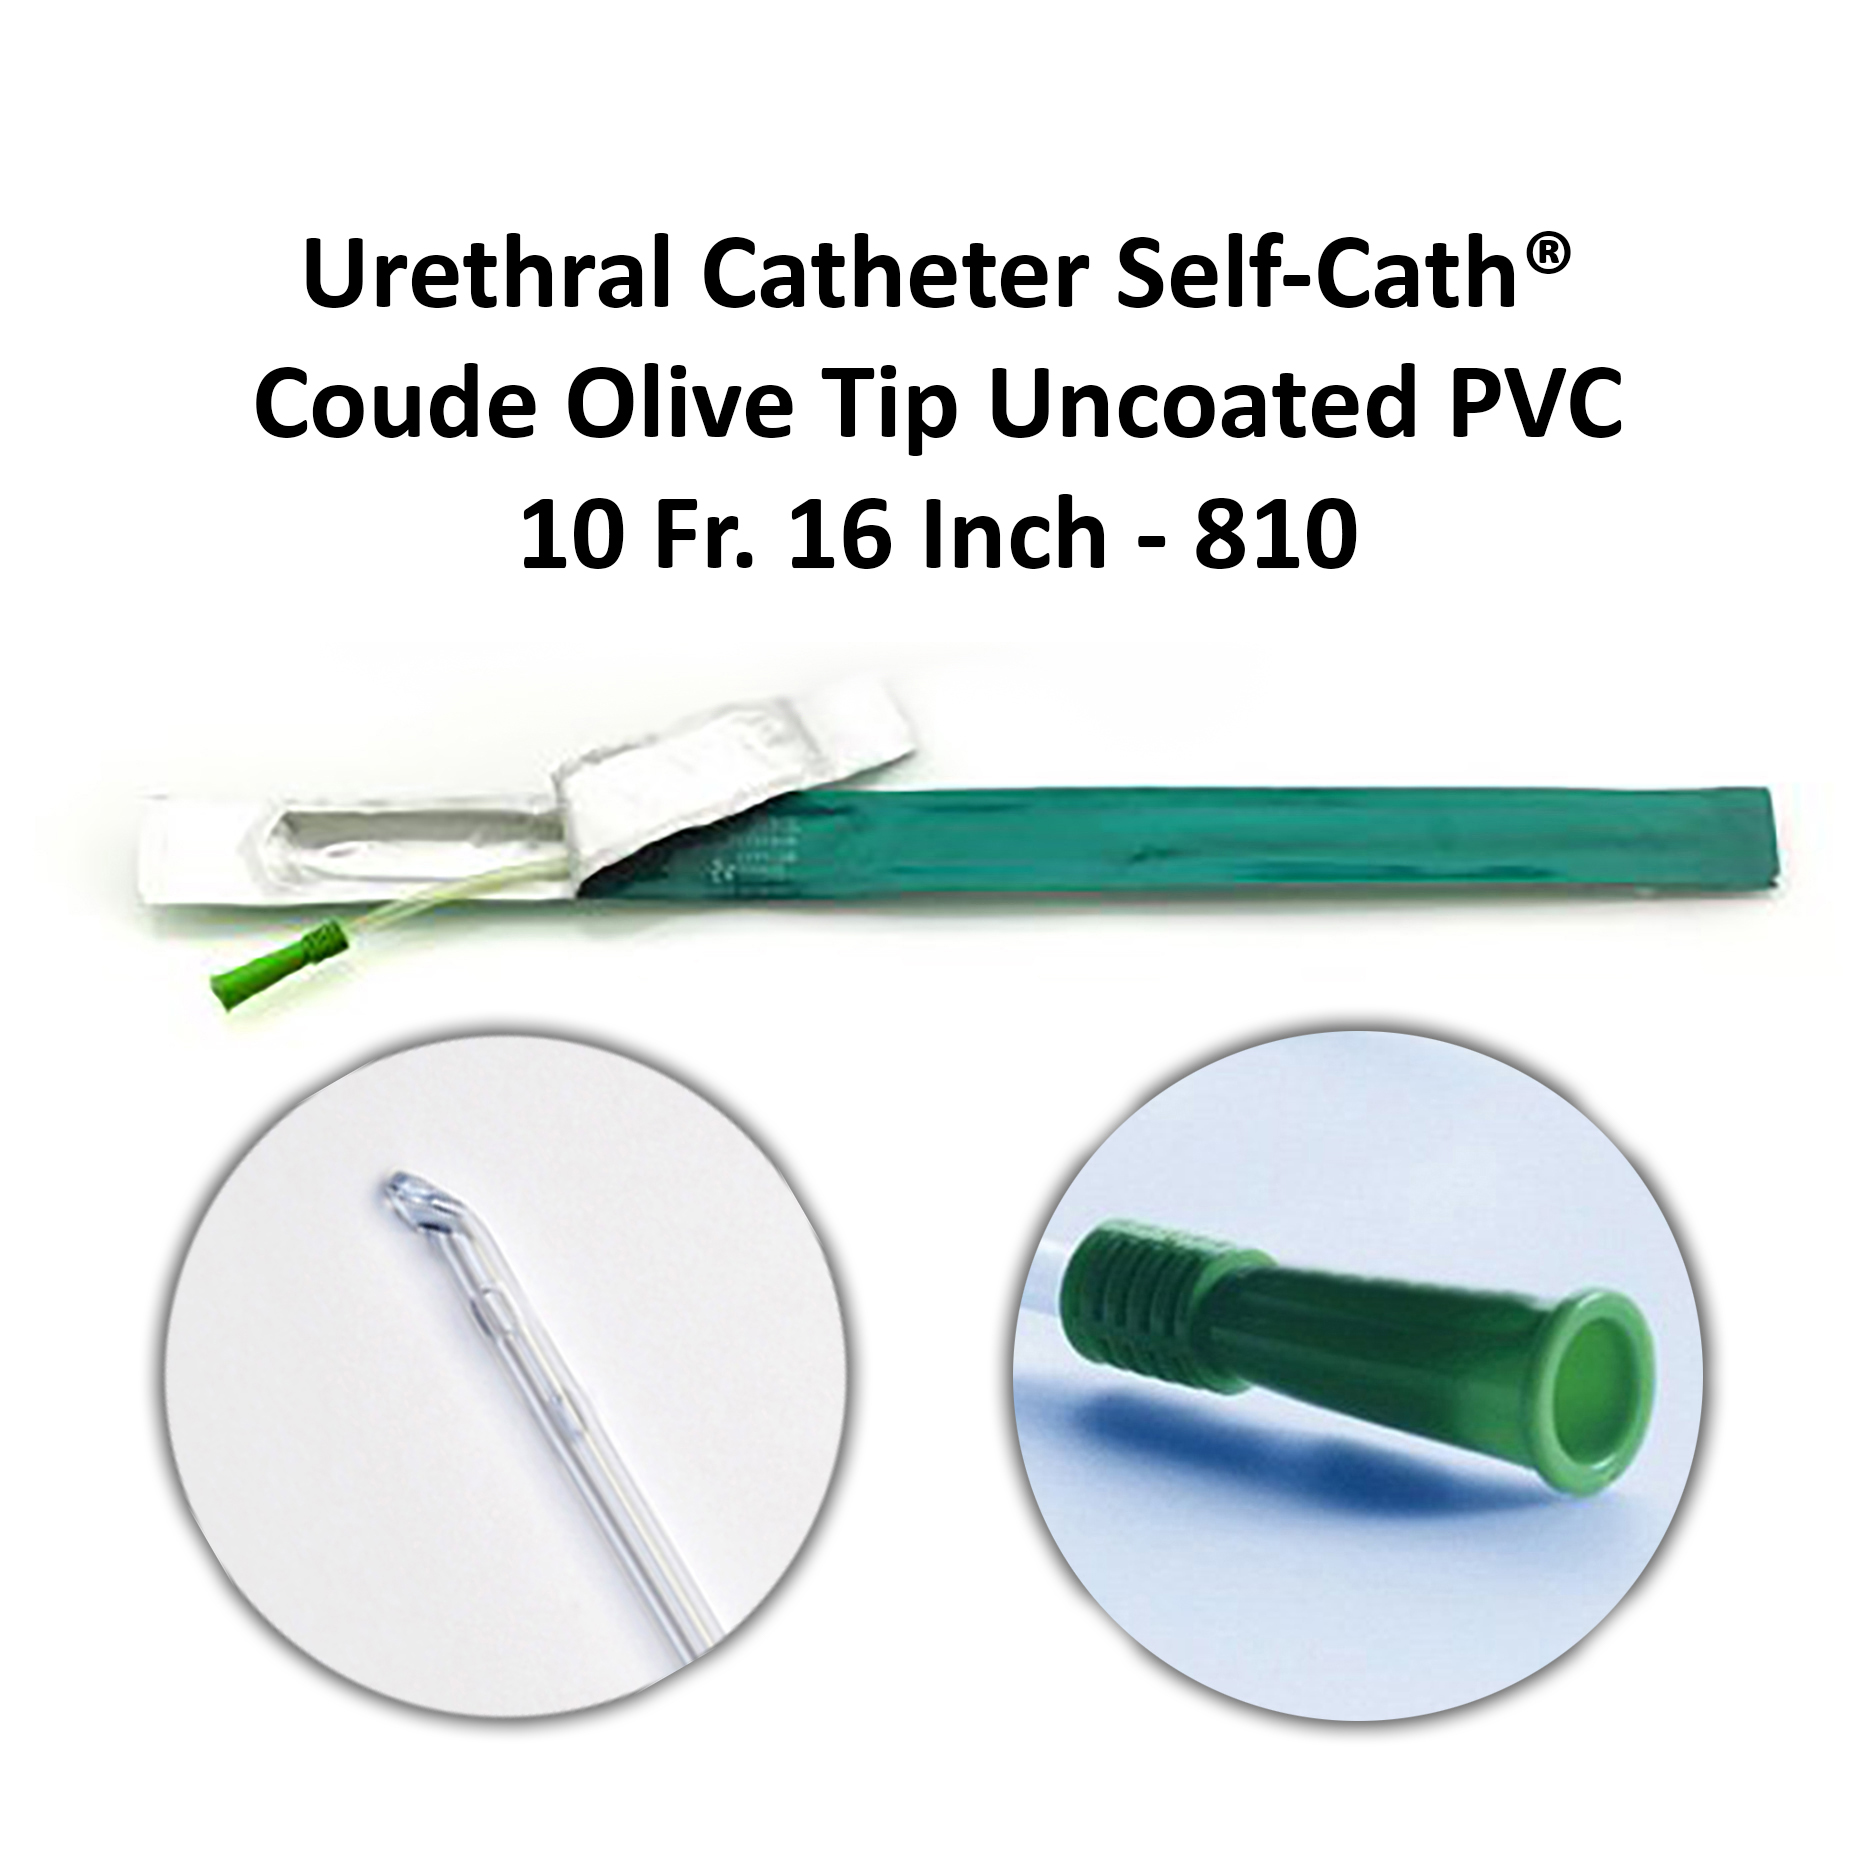 Urethral Catheter Self-Cath® Coude Olive Tip Uncoated PVC 10 Fr - 16 Inch - 810 Available in Michigan USA